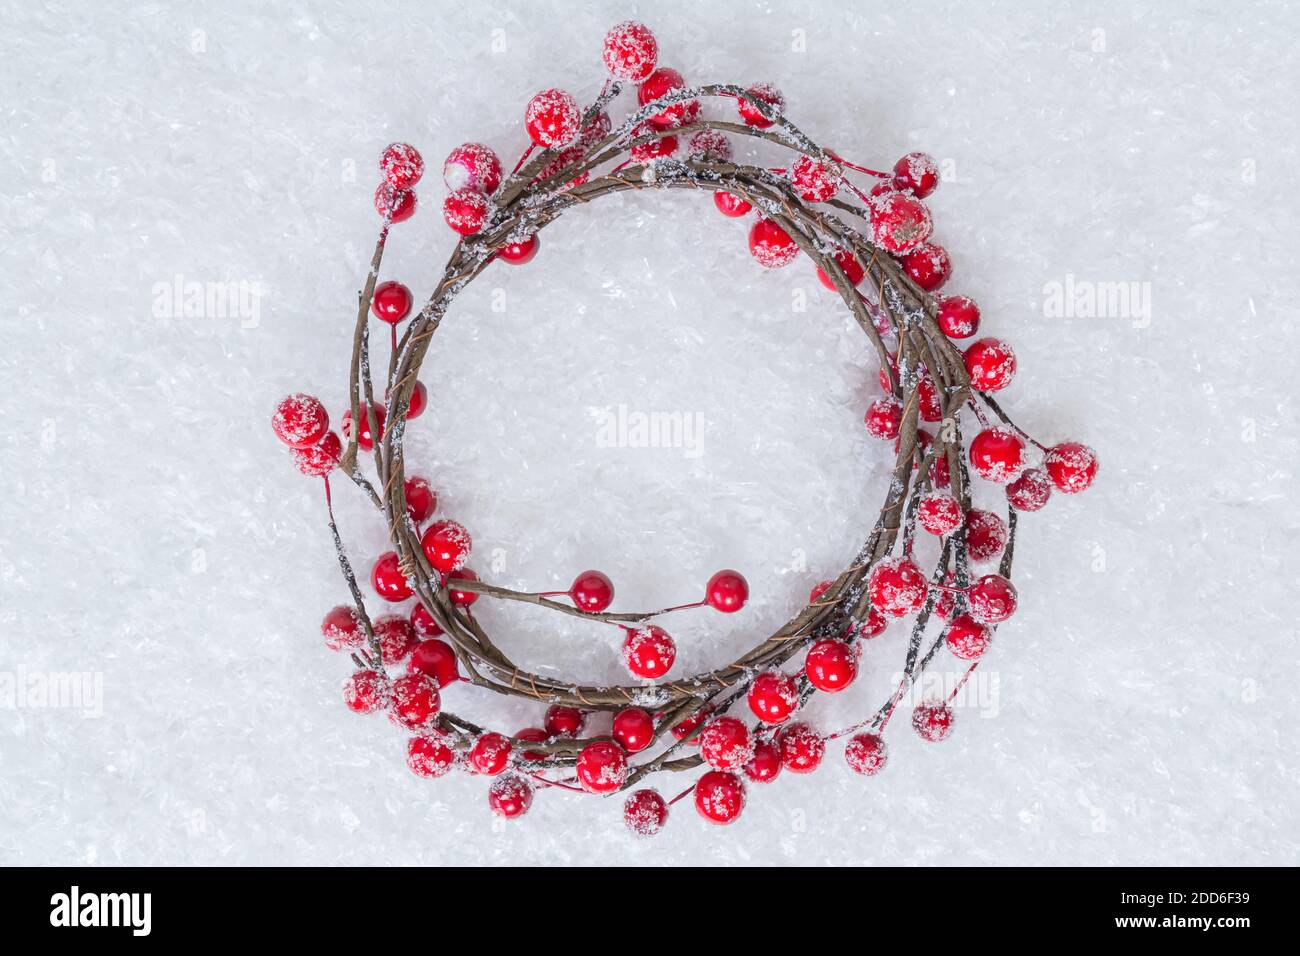 Christmas wreath of twigs with red holly berries on white snow background. Holiday berry wreath. Winter holiday theme. Happy New Year. Copy space for Stock Photo